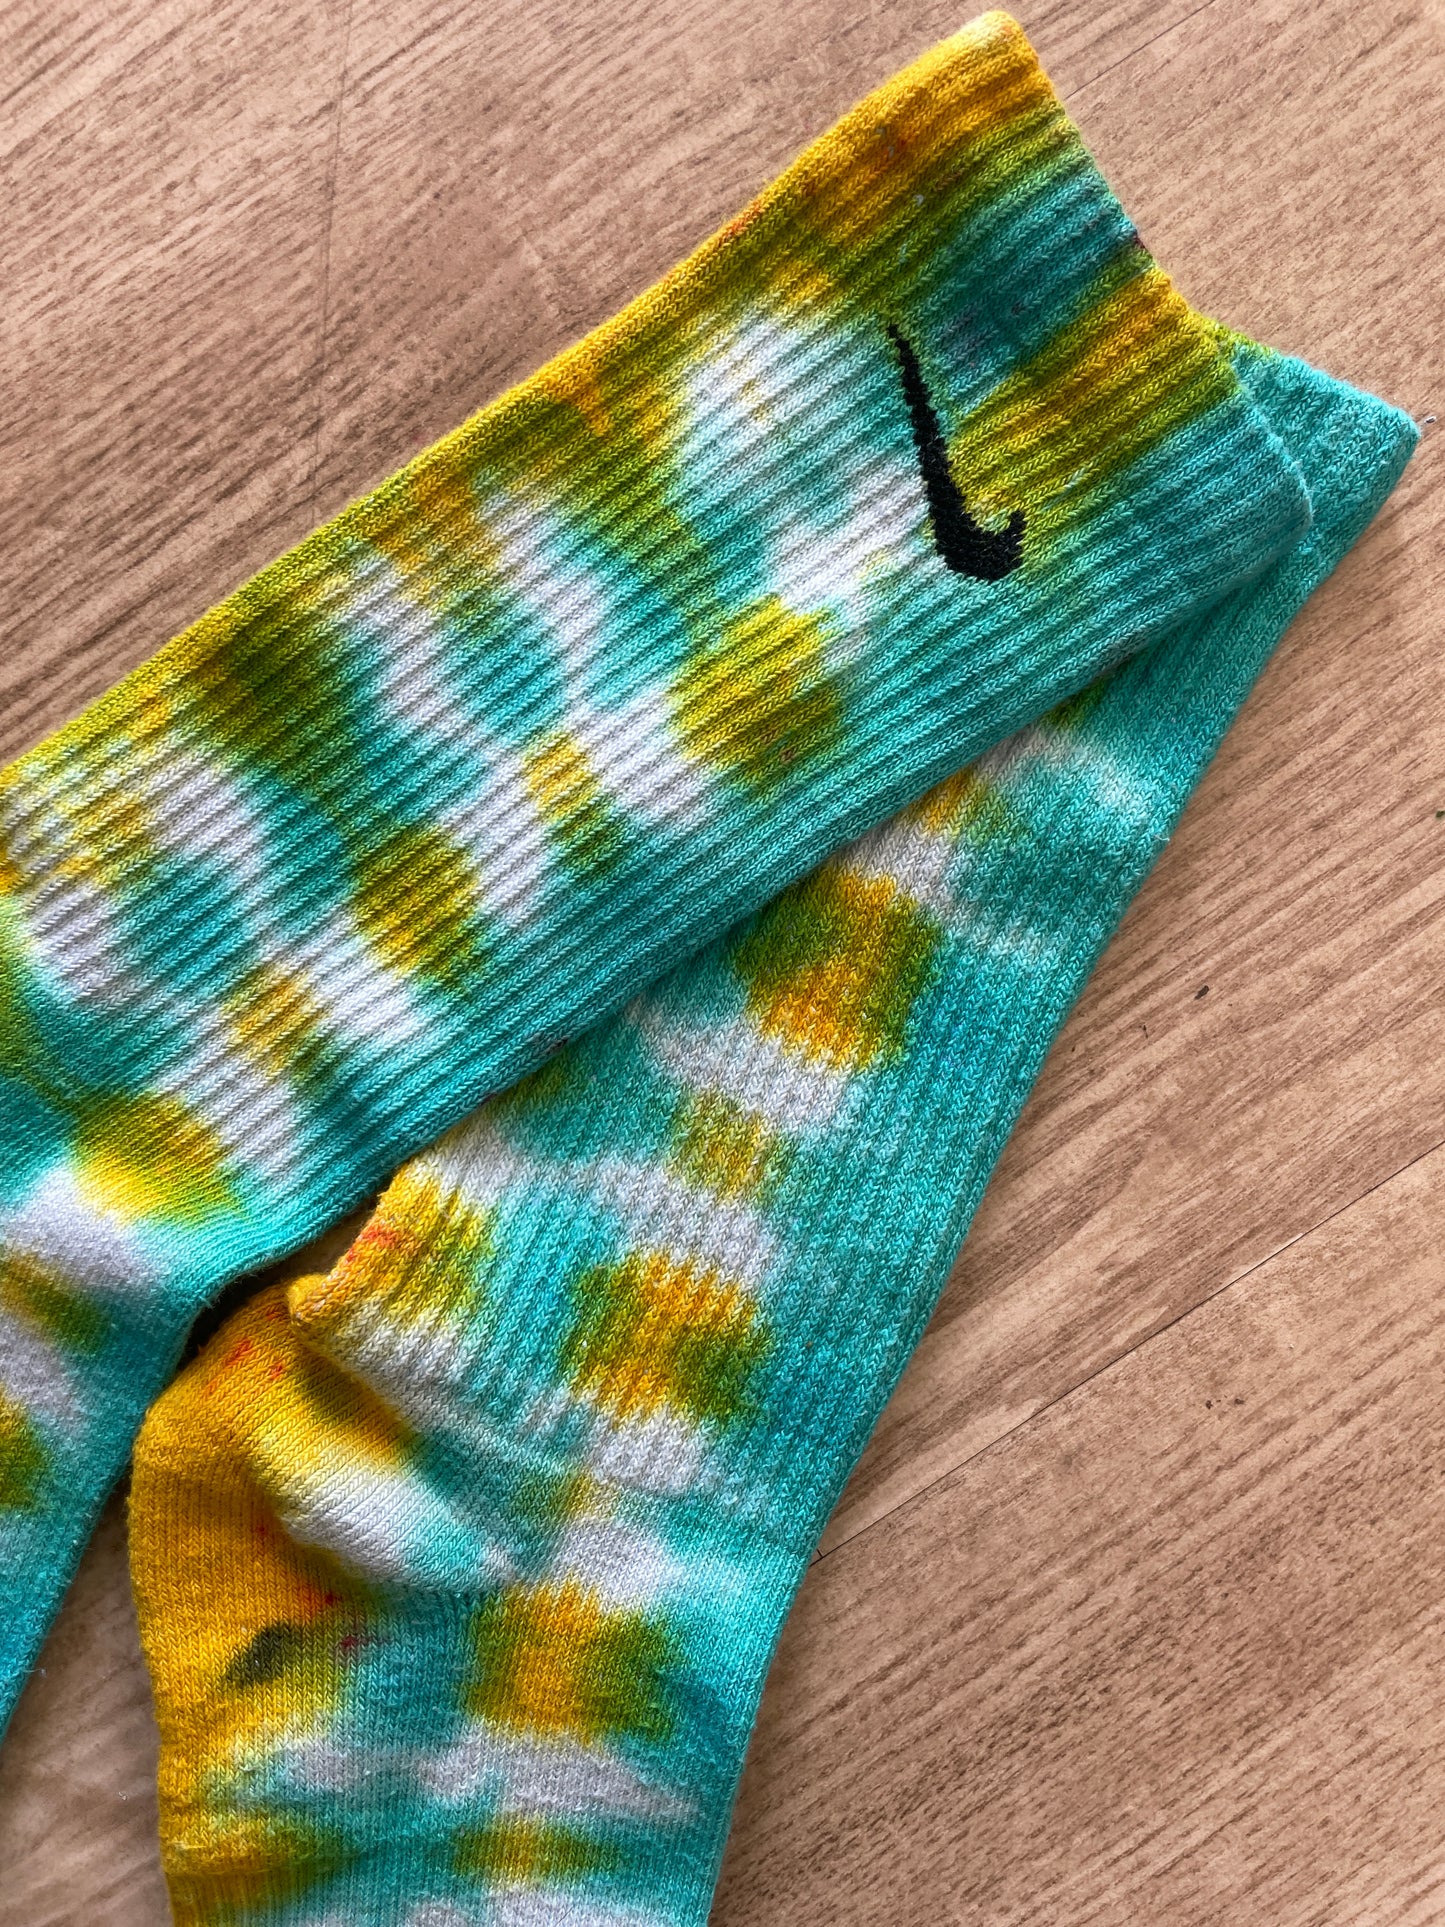 NIKE Socks Hand Tie Dyed Yellow and Teal Nike Dri-FIT Everyday Plus Crew Training Socks - Size Large (Men's 8-12/Women's 10-13)